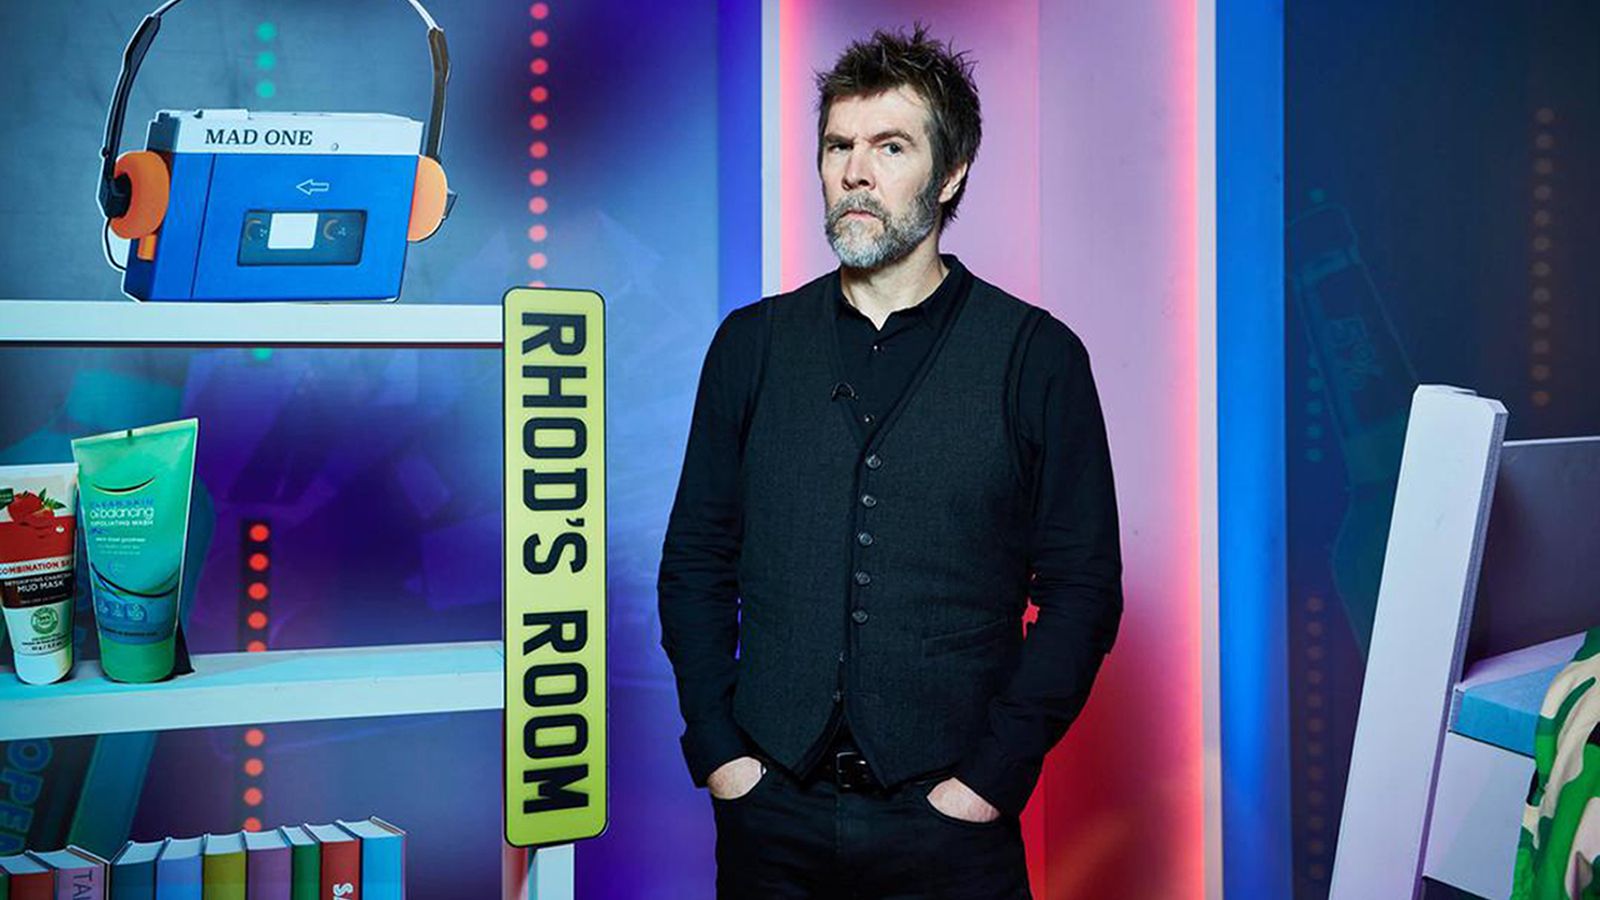 Rhod Gilbert 'coming back' to former self after 'faultless' cancer treatment